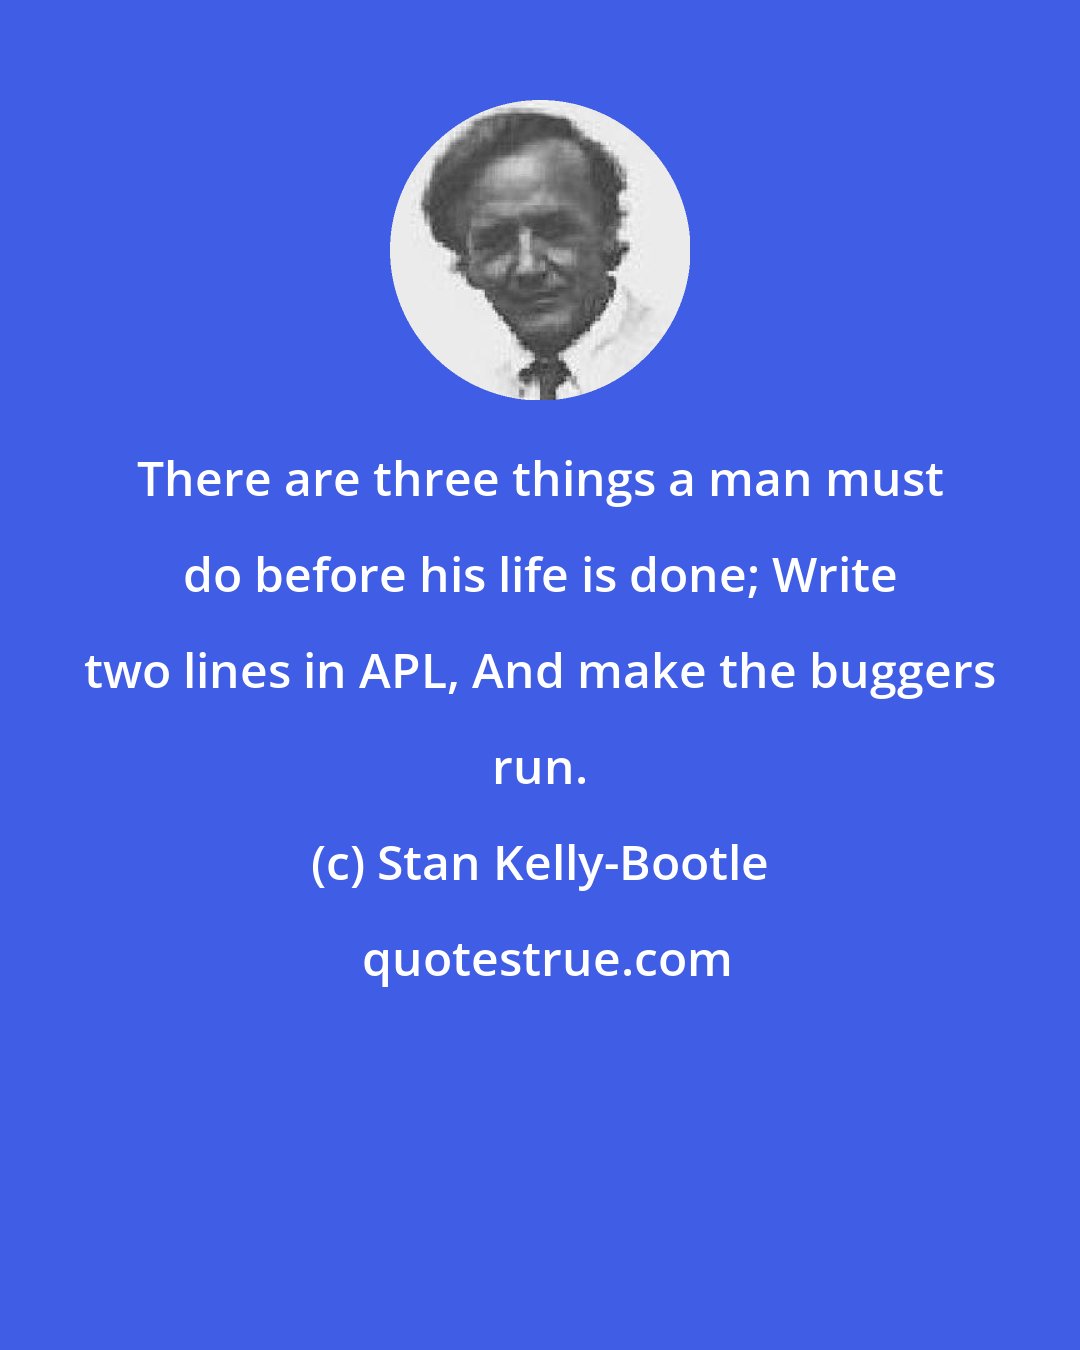 Stan Kelly-Bootle: There are three things a man must do before his life is done; Write two lines in APL, And make the buggers run.